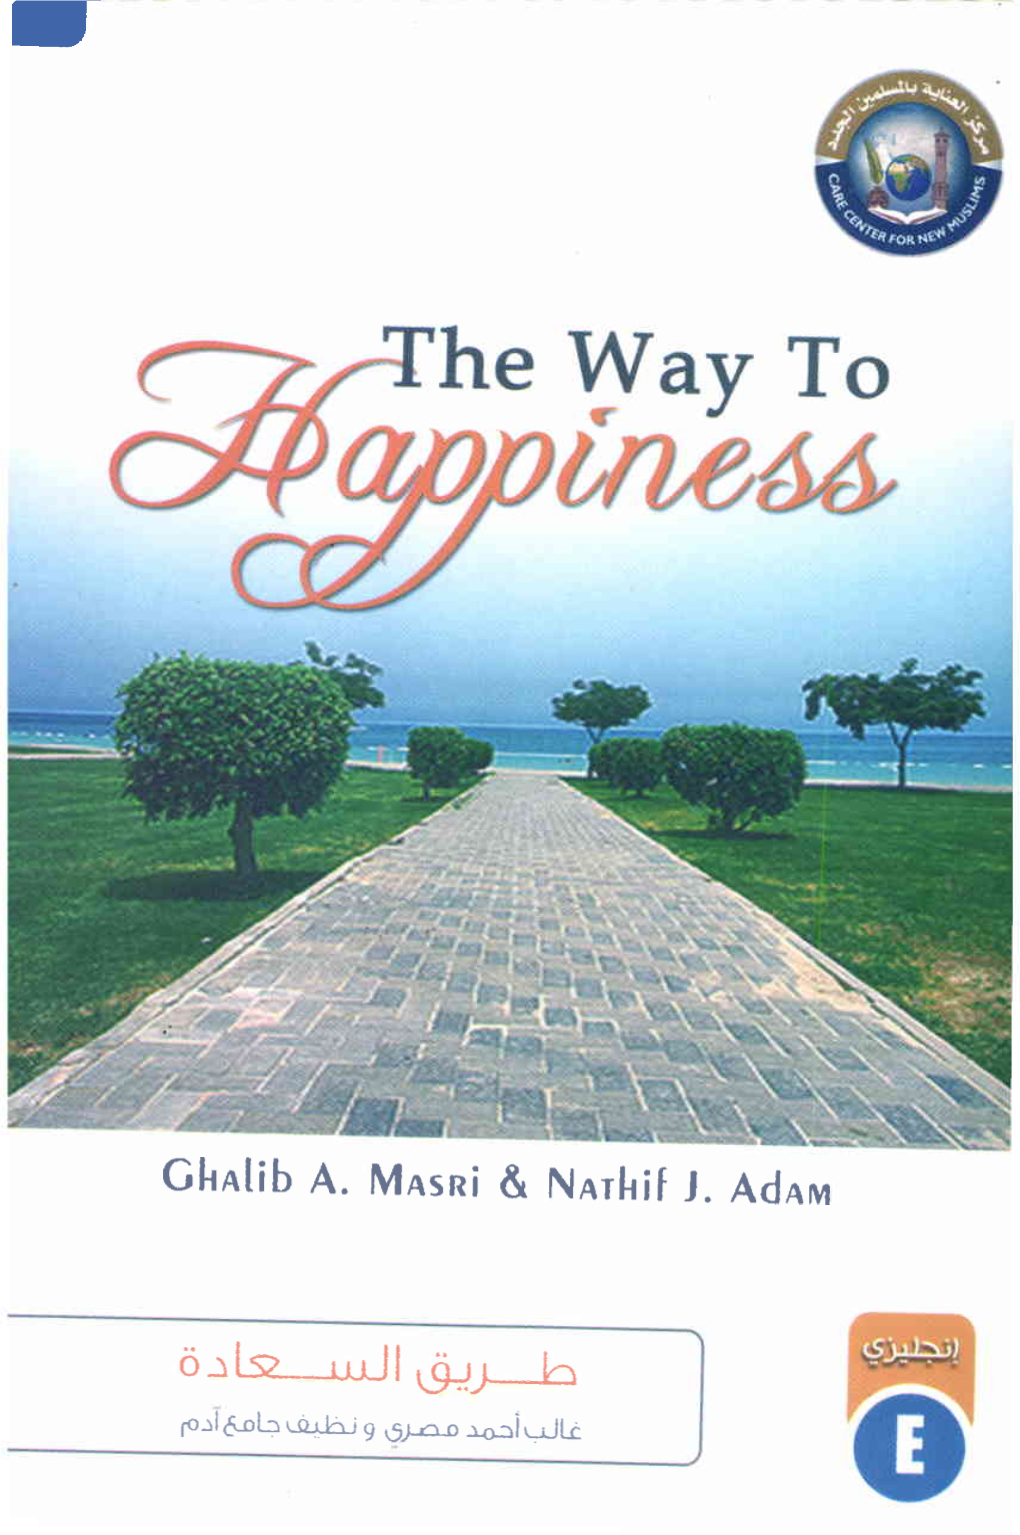 The Way to Happiness Despite the Luxury They 'Lhat Enjoy